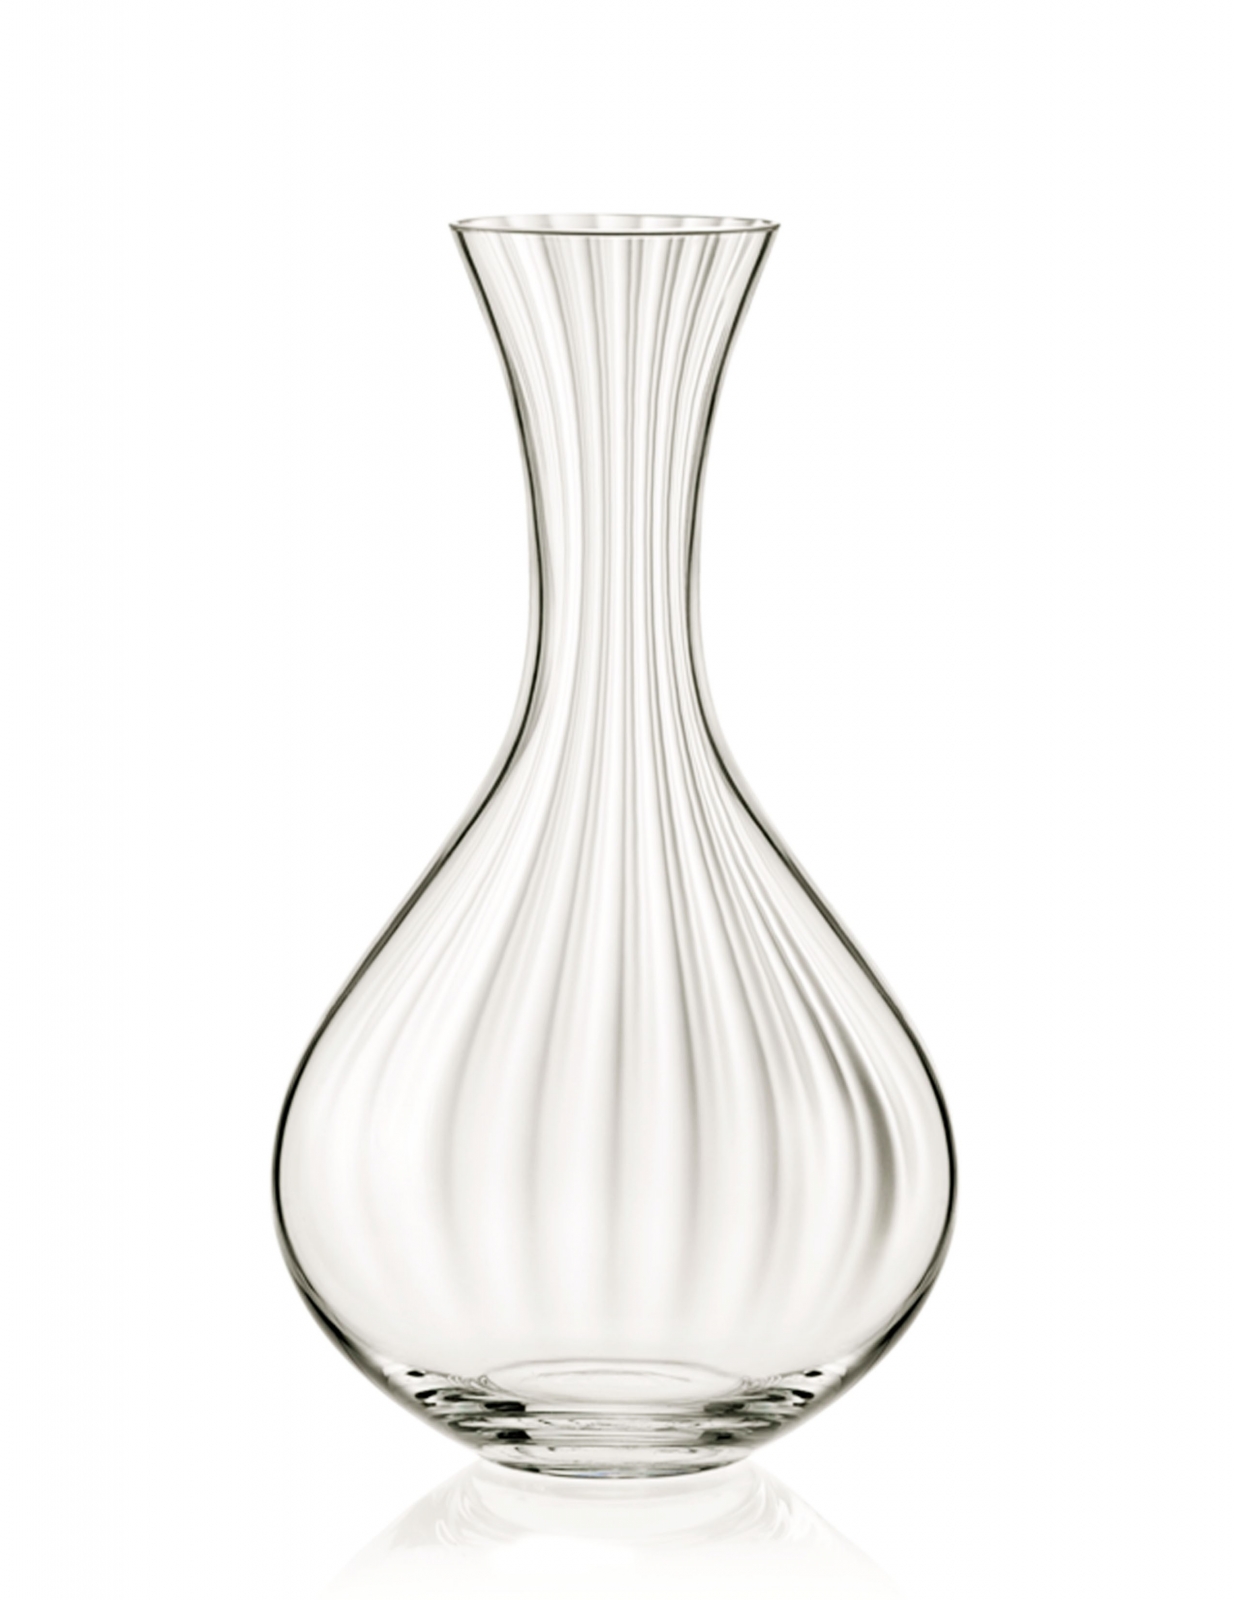 Decanter with Straight Cut Design